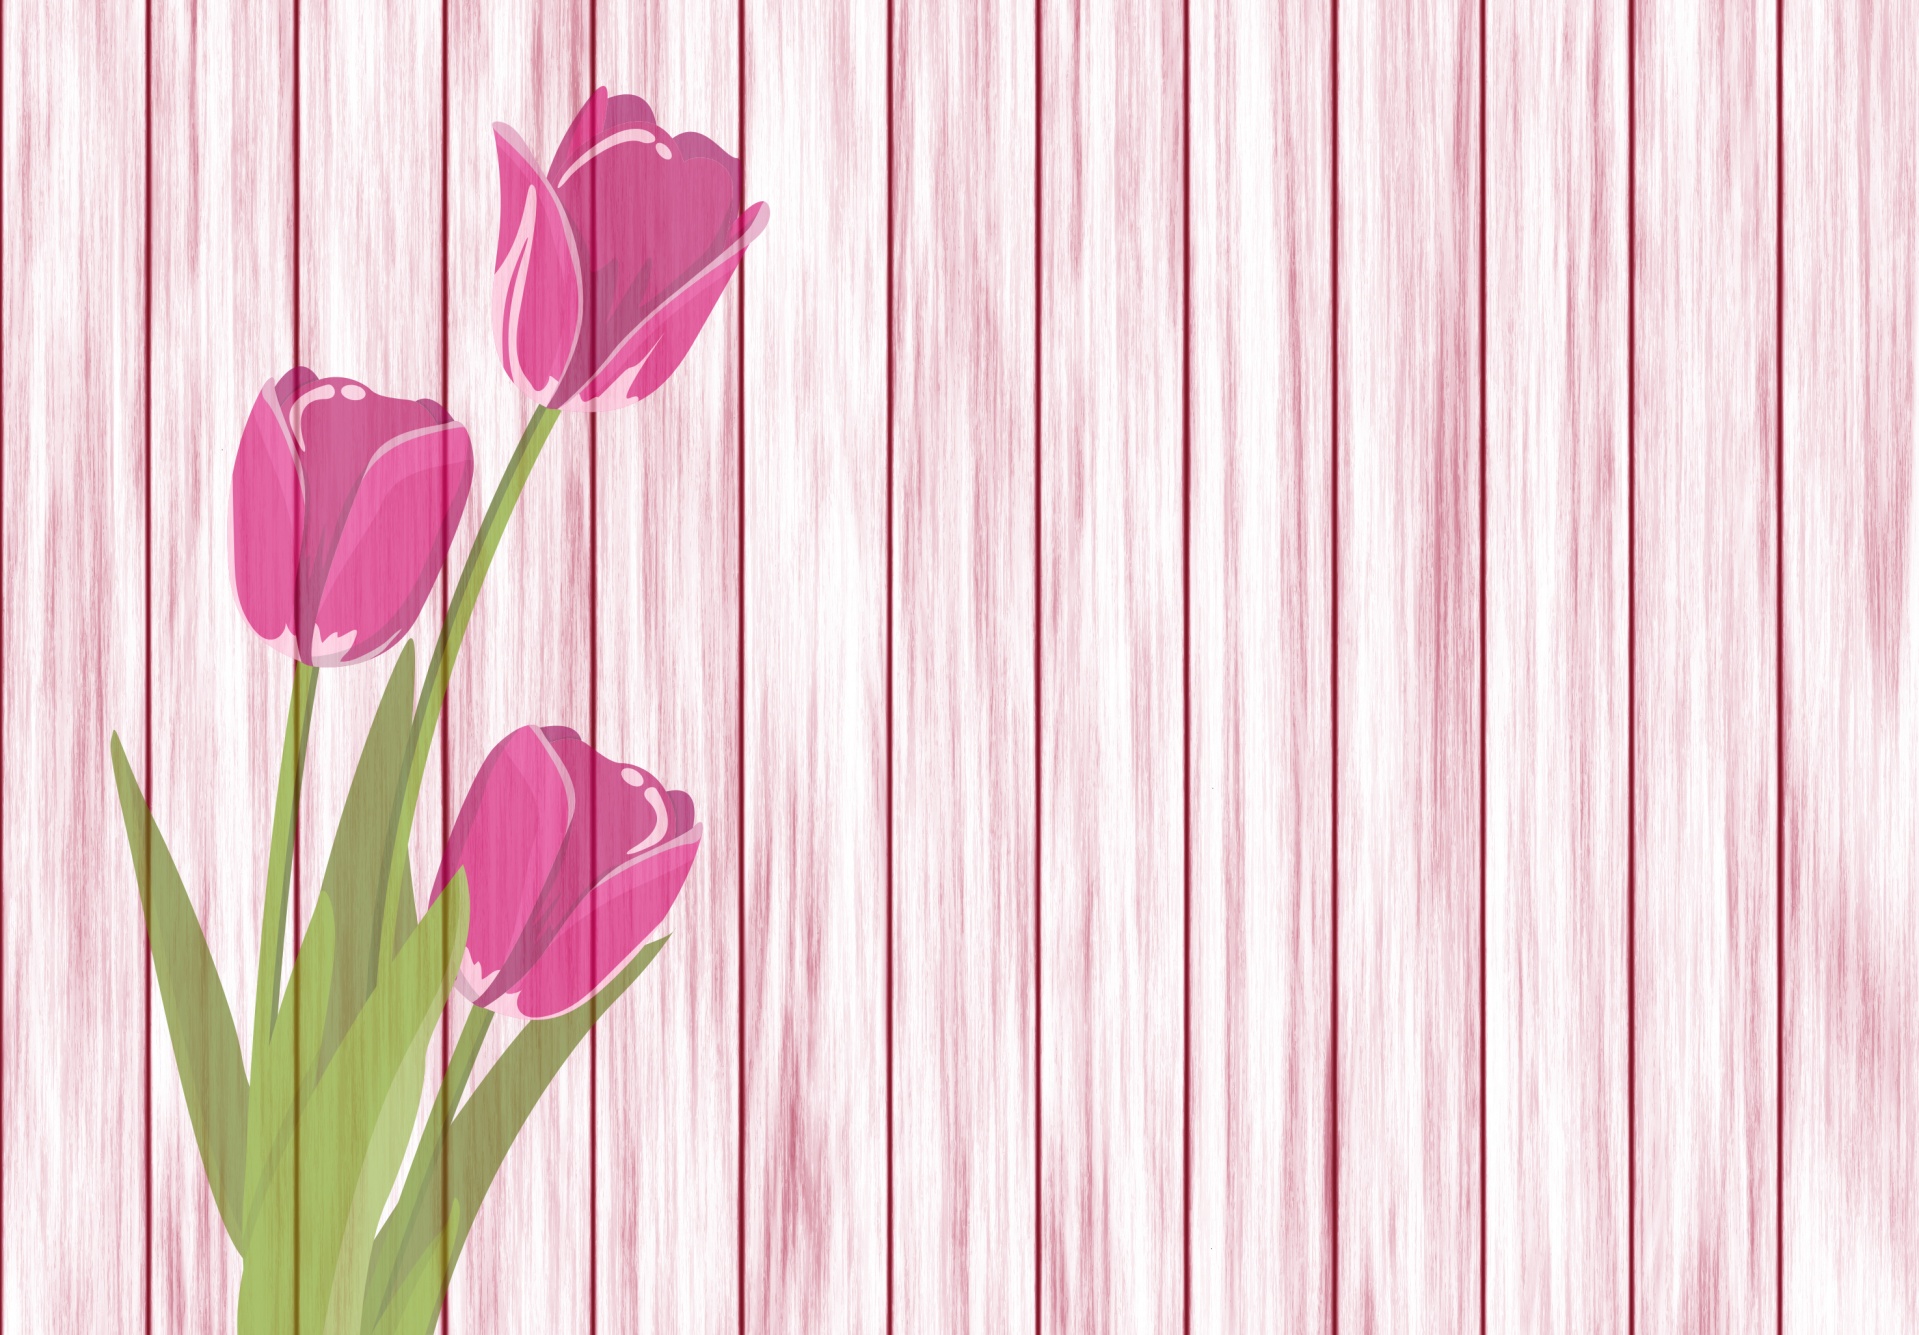 Pink tulips on a pink paneled wall designed as a card with copy space to write your own greeting. This image is free for download and use on commerical or personal projects